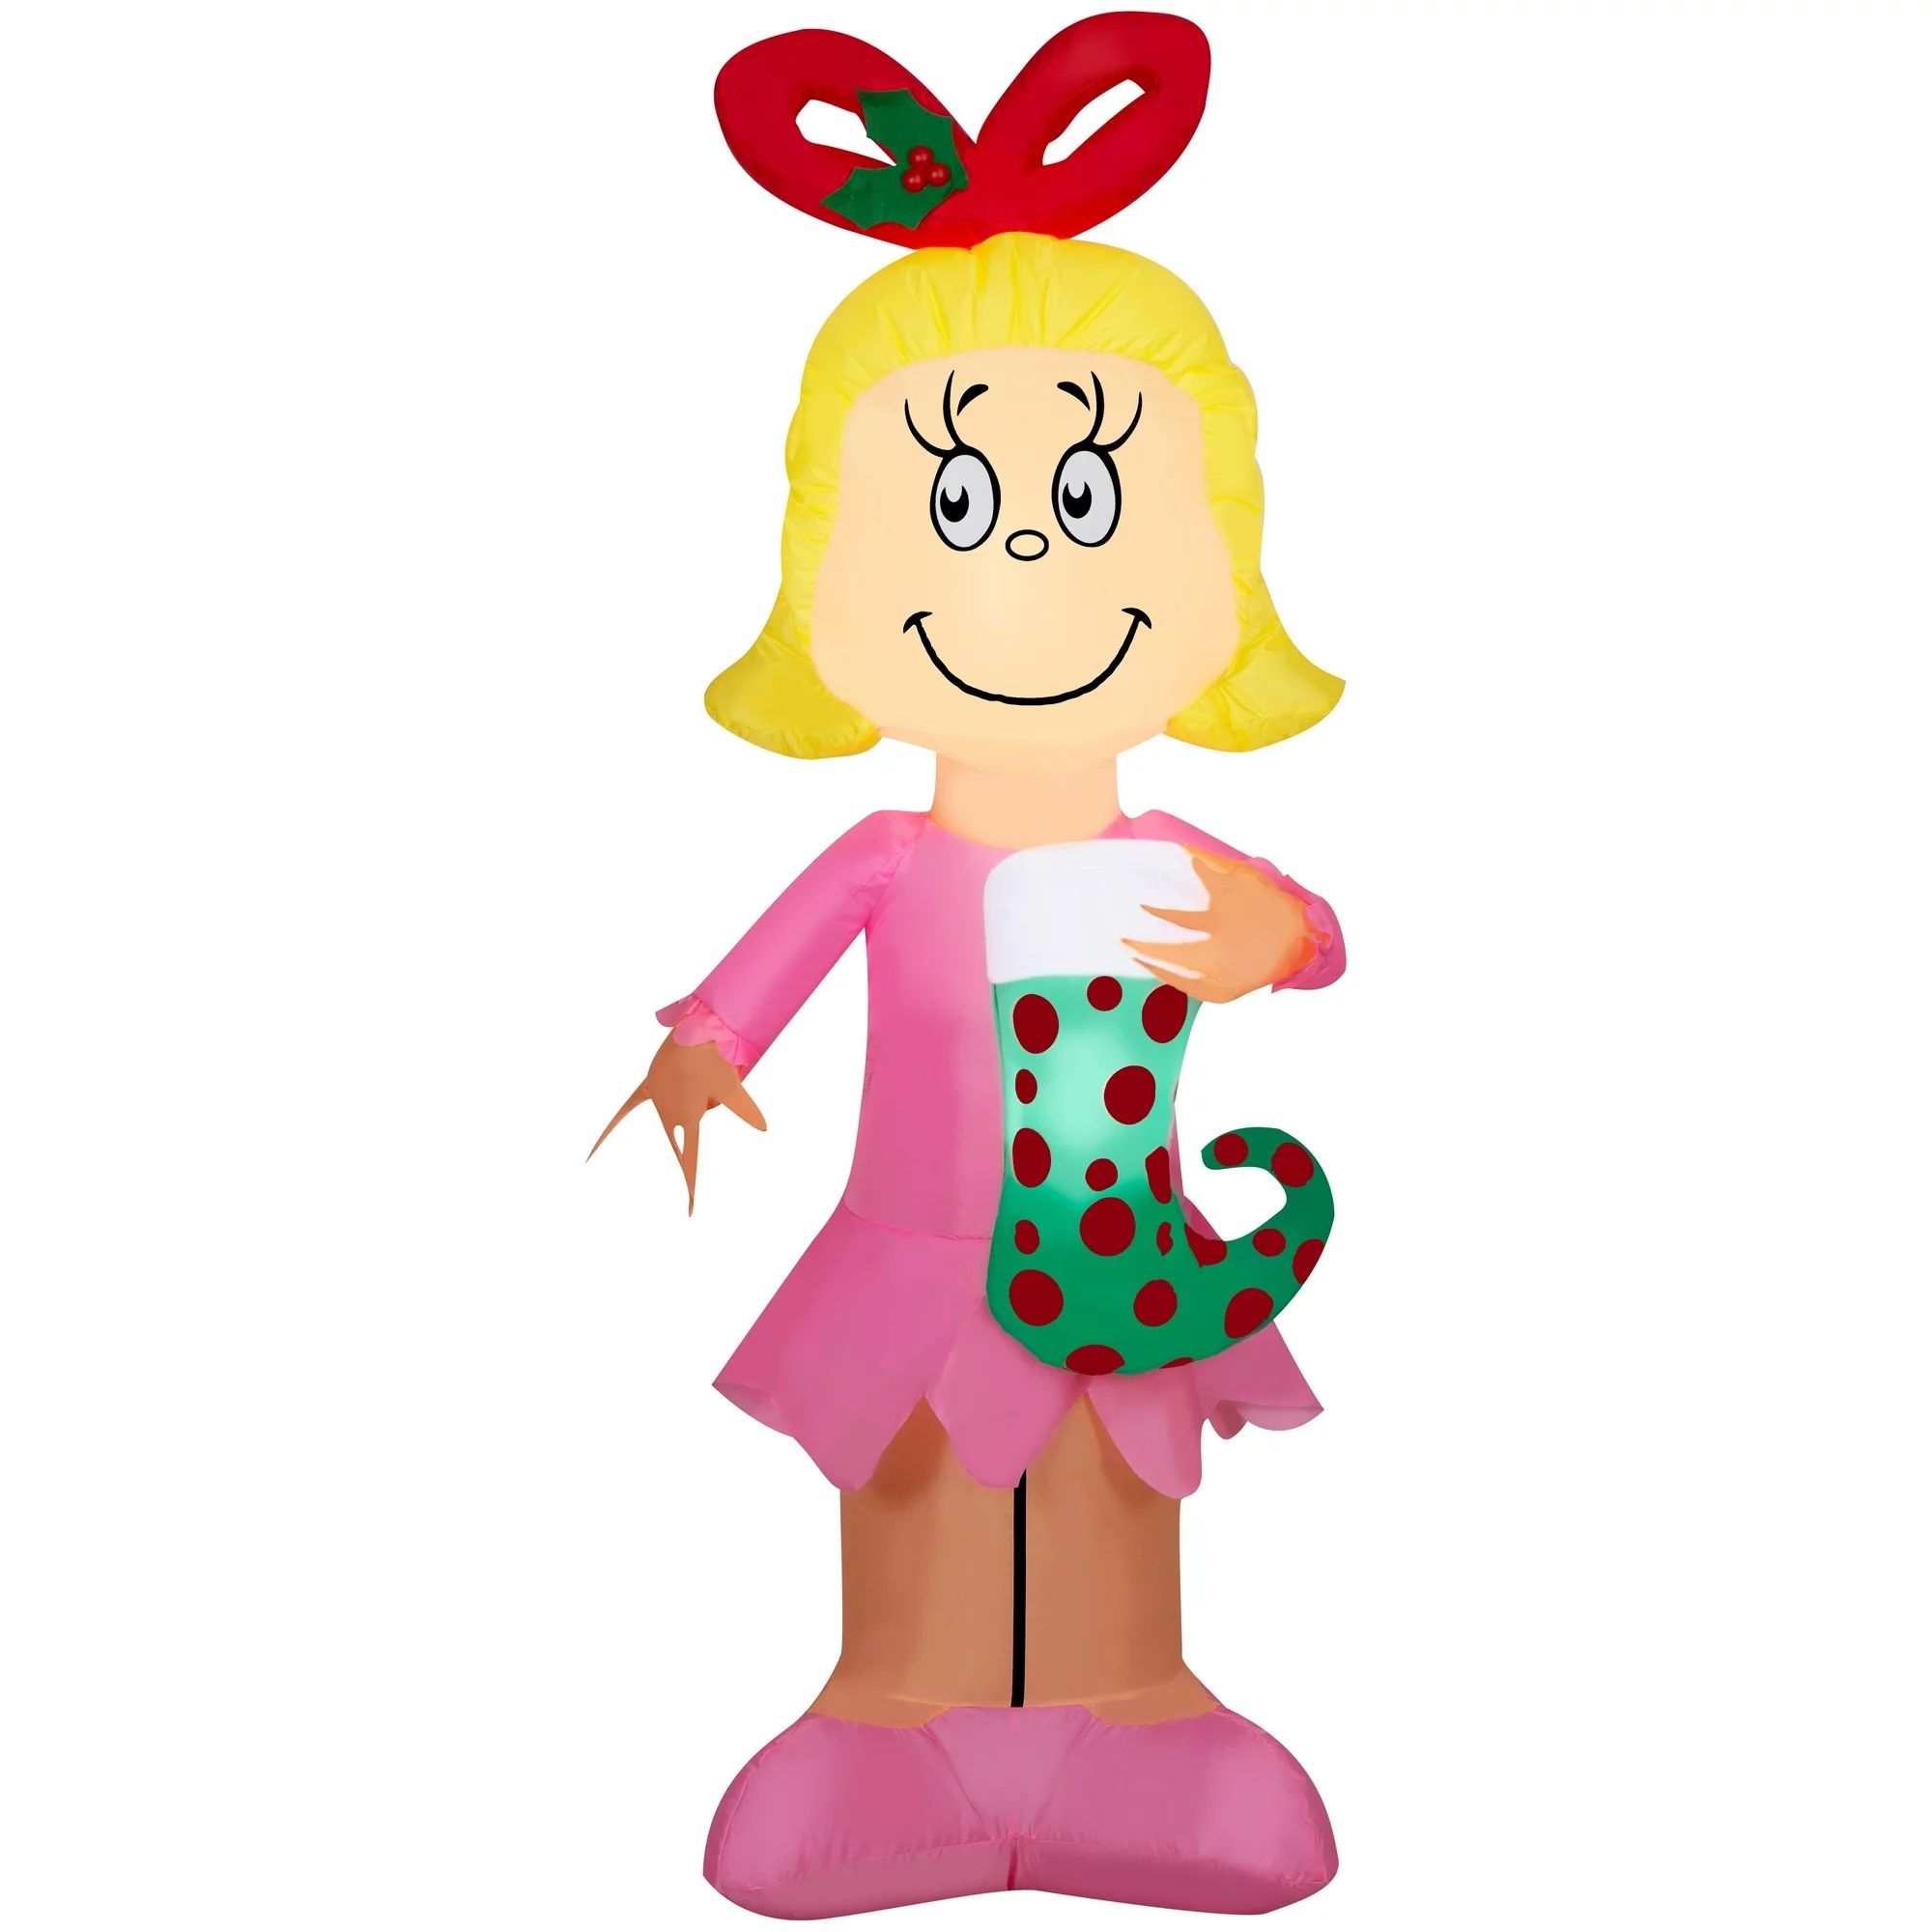 Airblown Inflatables 5 Foot The Grinch Cindy Lou Who Decoration | Walmart (US)